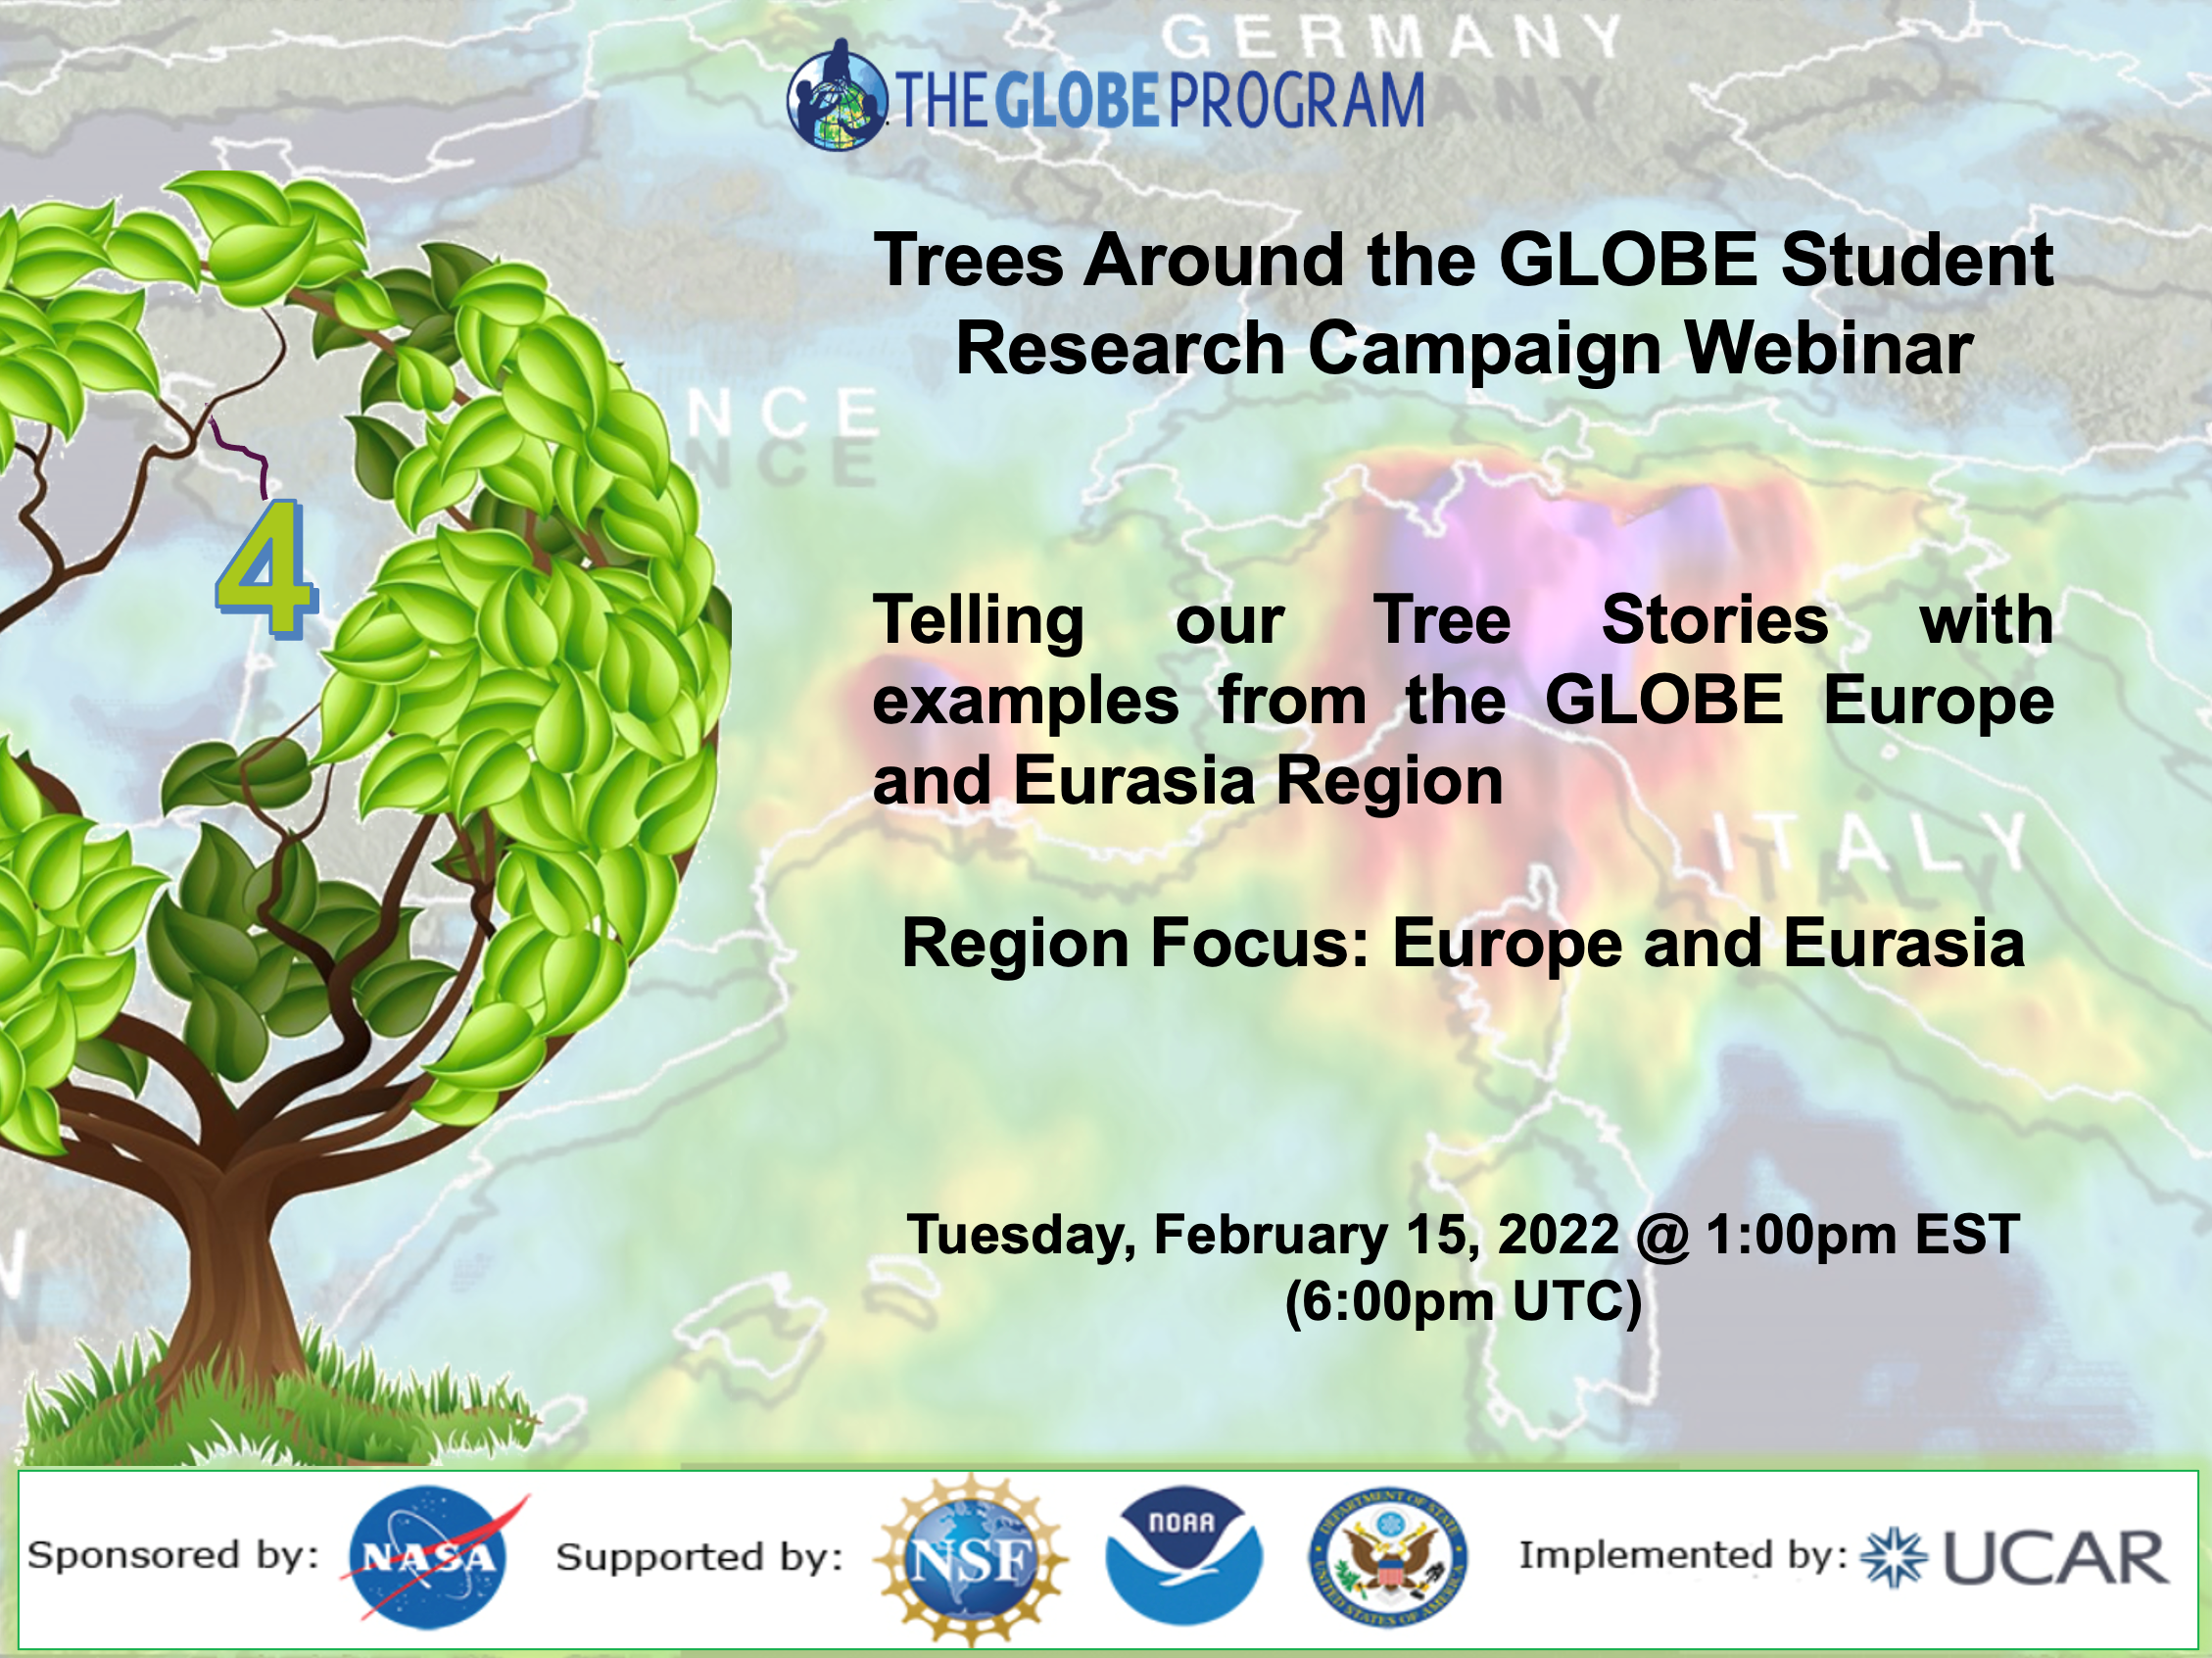 Trees Around the GLOBE 15 February webinar shareable, showing a tree and stating the time/date of the webinar